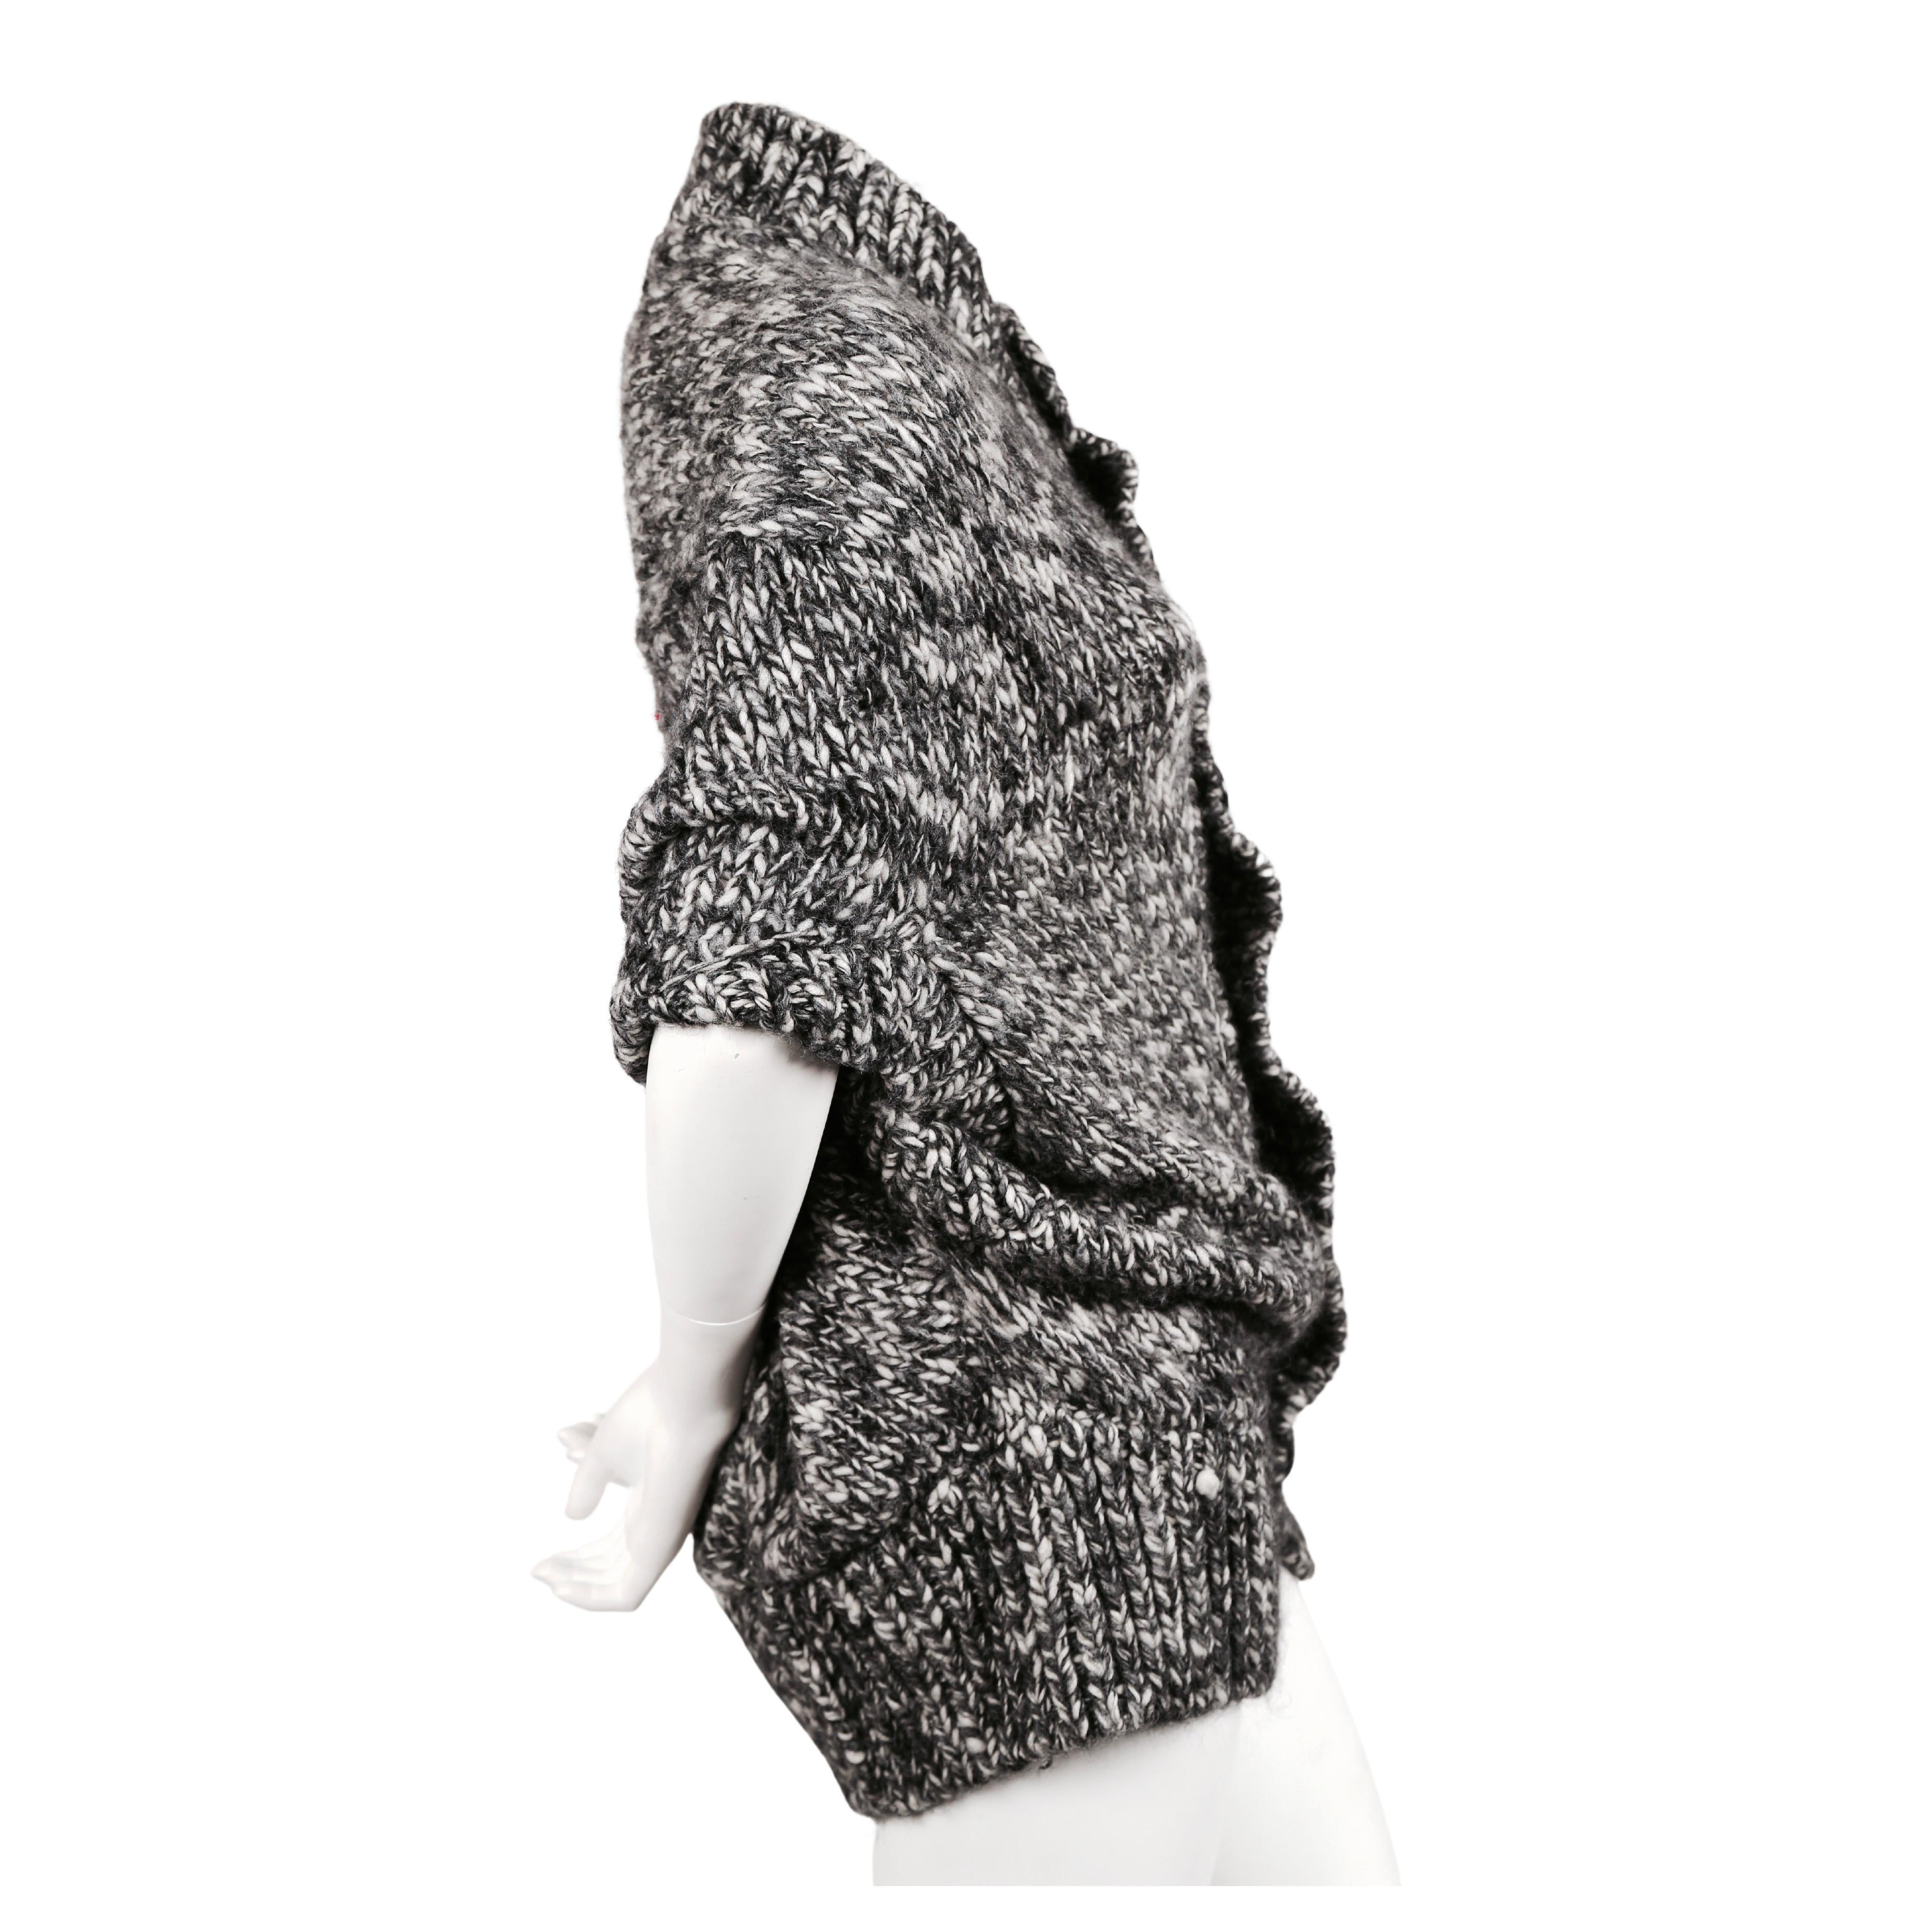 Very soft, grey marled knit poncho sweater with black button front from Junya Watanabe by Comme Des Garcons dating to fall of 2008. Looks great layered over a button up shirt. Labeled a size 'S'. Approximate measurements: bust is flexible, waistband